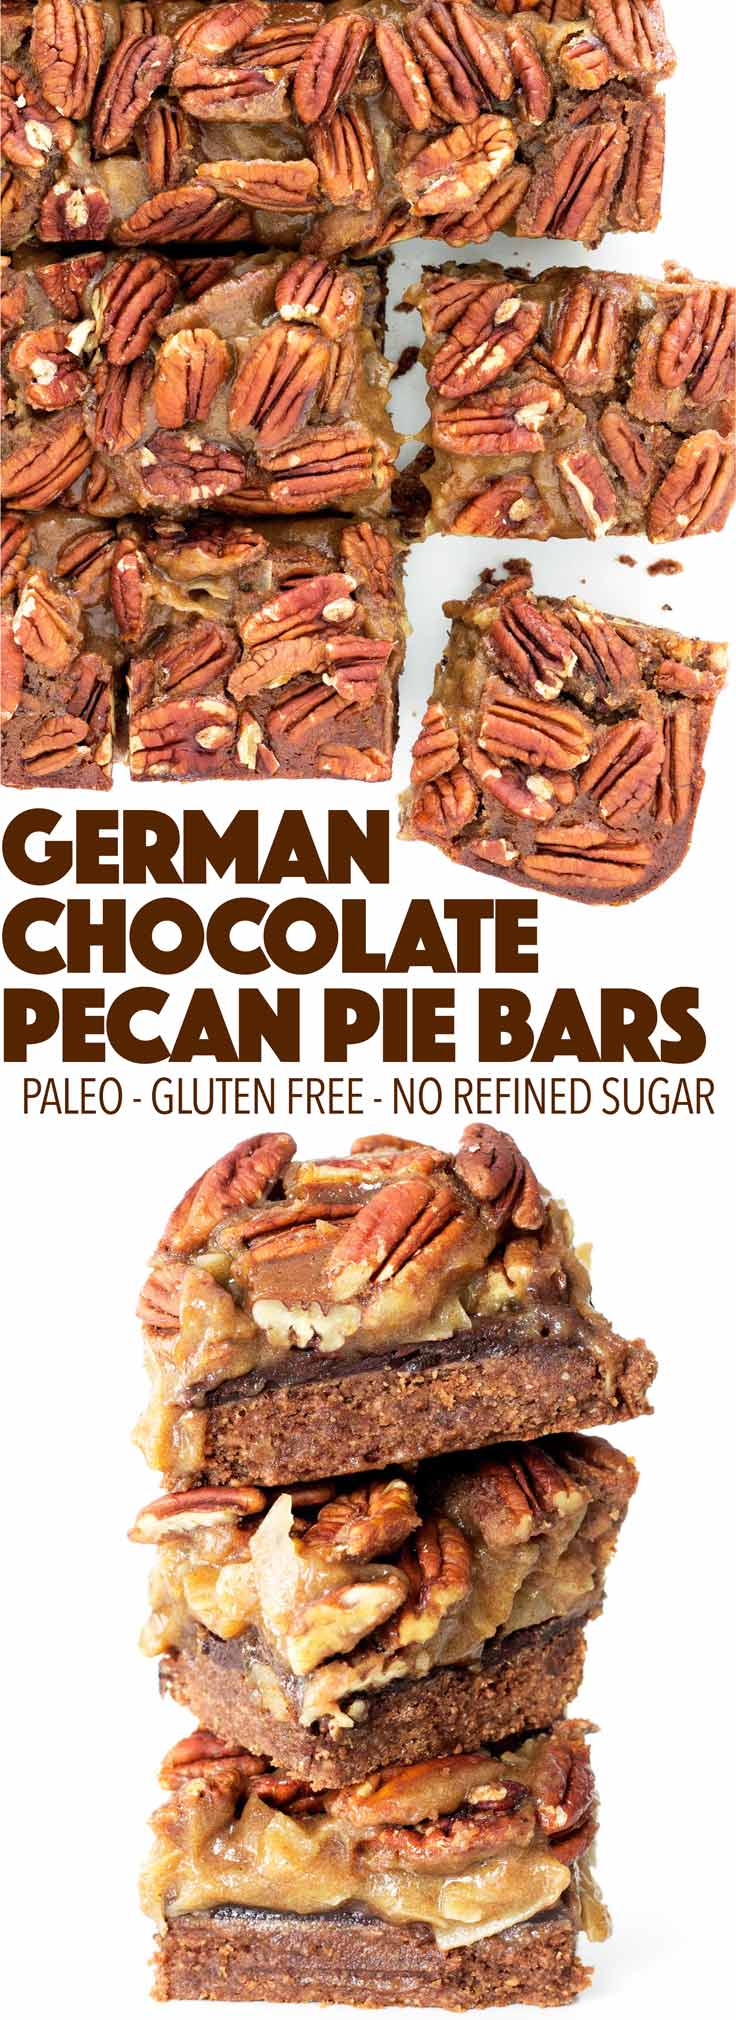 Pecan pie meets German chocolate cake! This healthy holiday dessert is perfect for Thanksgiving or Christmas. Paleo, gluten free, and dairy free!